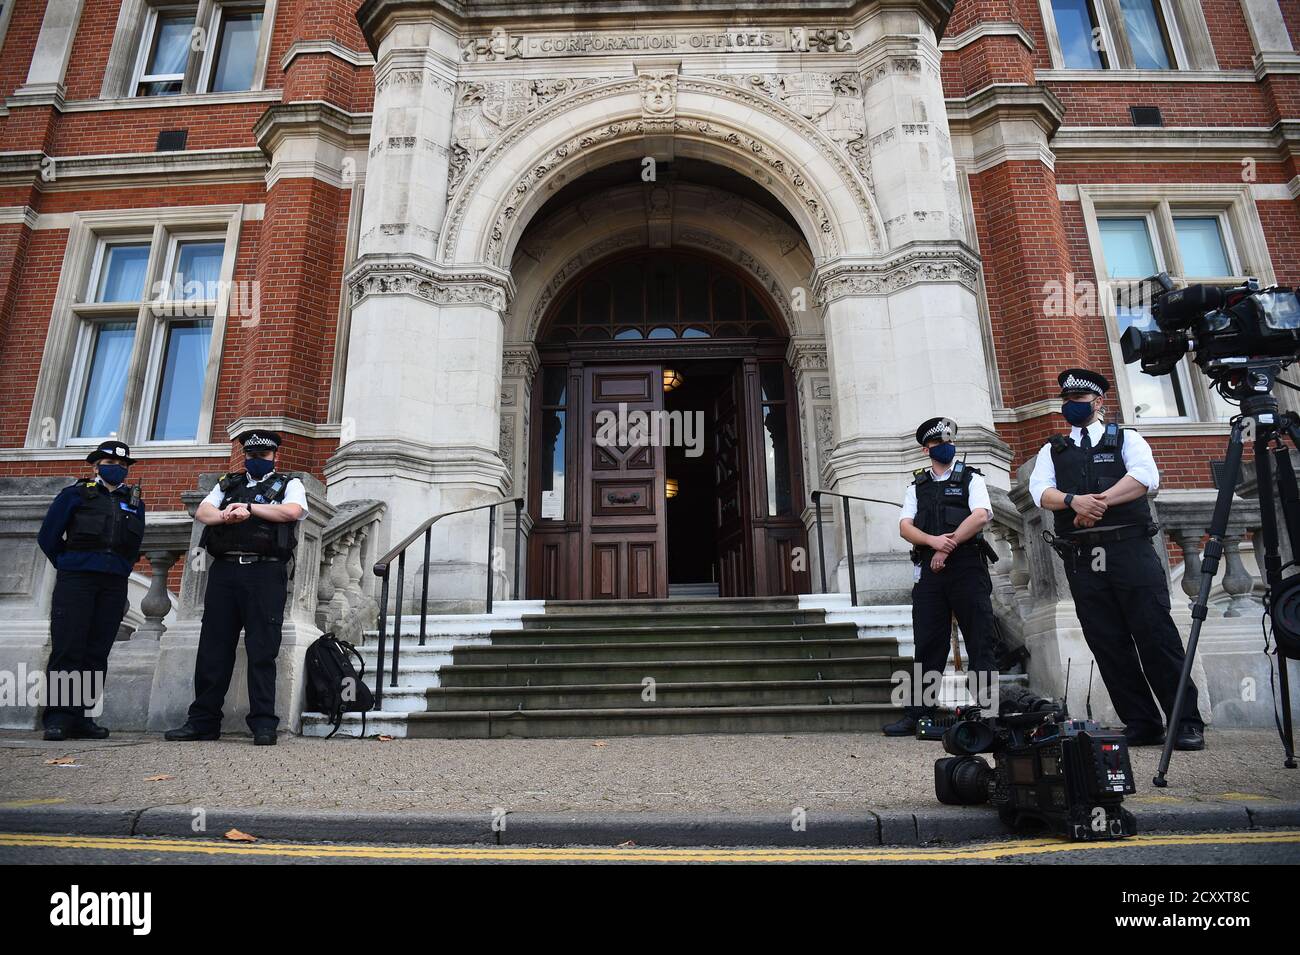 Police Officers outside Croydon Town Hall, south London, ahead of the opening of the inquest into the death of police officer Sergeant Matt Ratana. Ratana died from a gunshot wound to the chest after being injured at Croydon Custody Centre, according to a preliminary post-mortem examination report read at Croydon Coroner's Court. Stock Photo